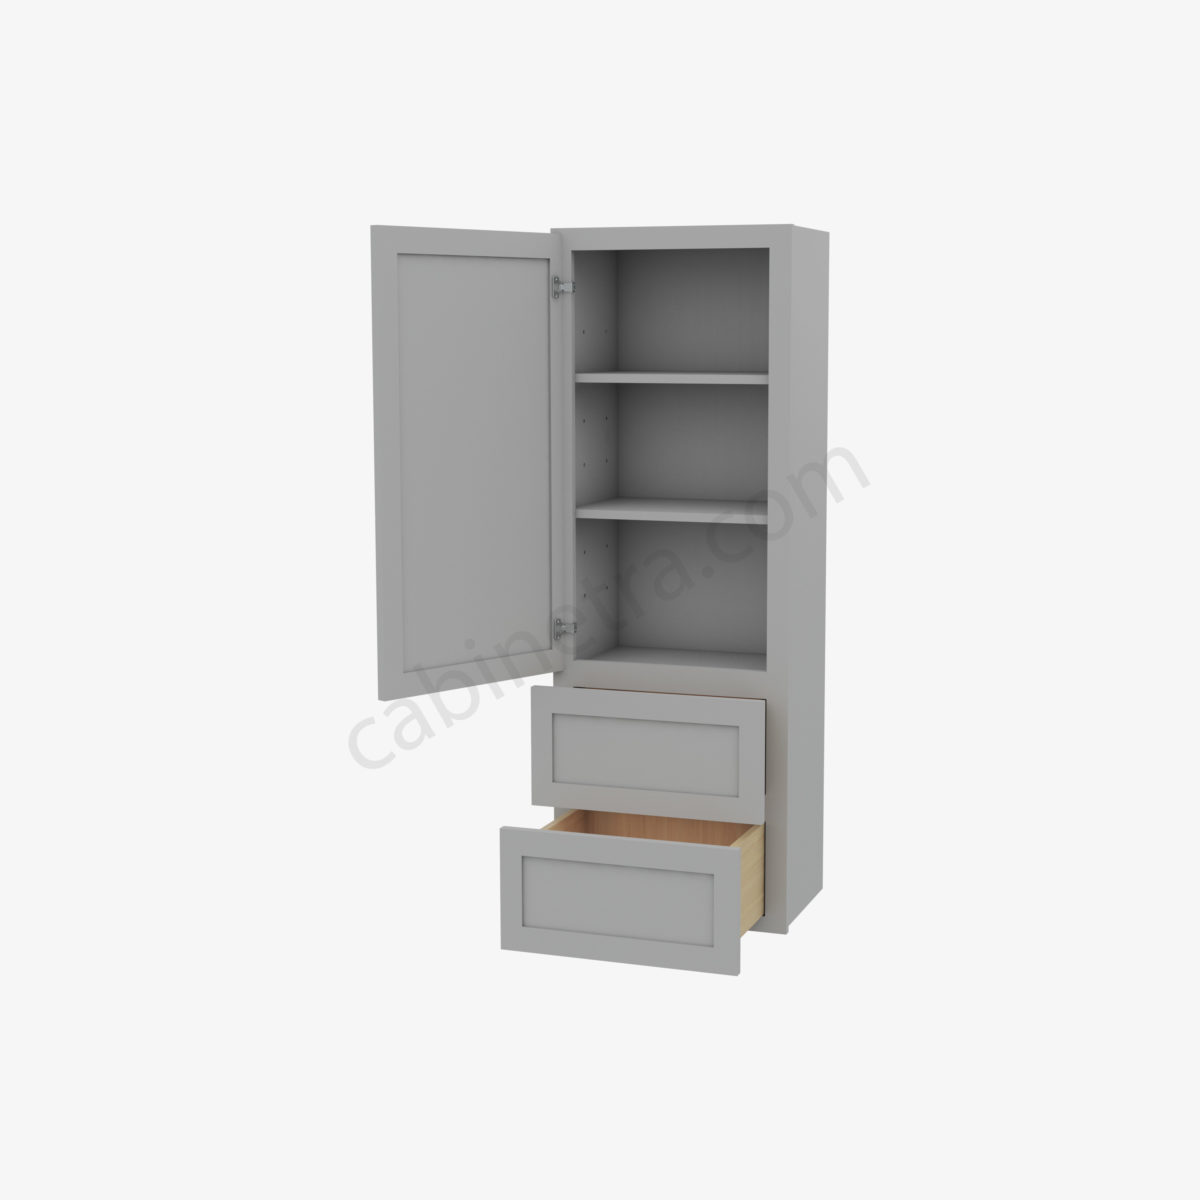 AB W2D1854 5 Forevermark Lait Gray Shaker Cabinetra scaled